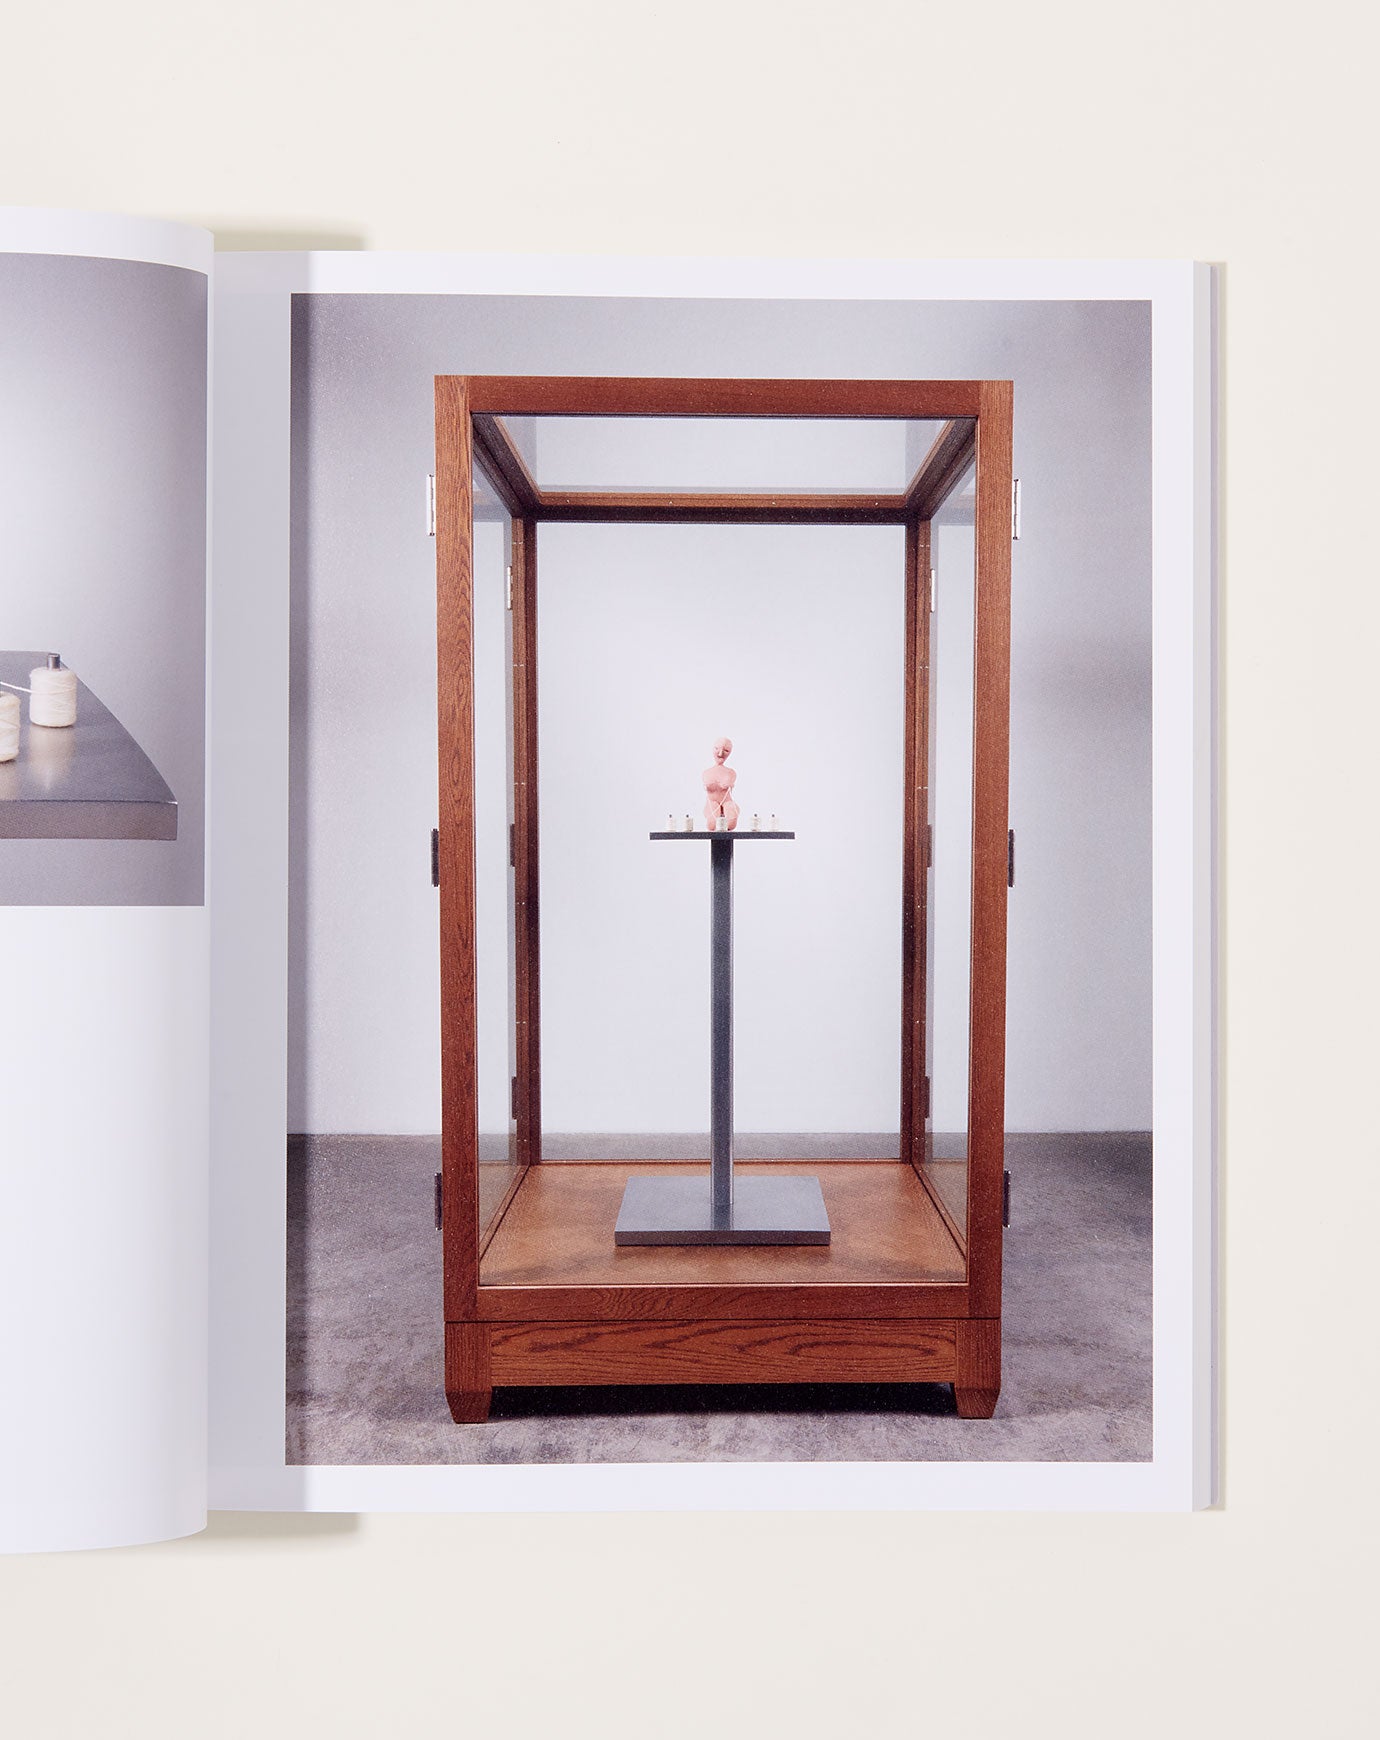 Artbook Louise Bourgeois: The Woven Child